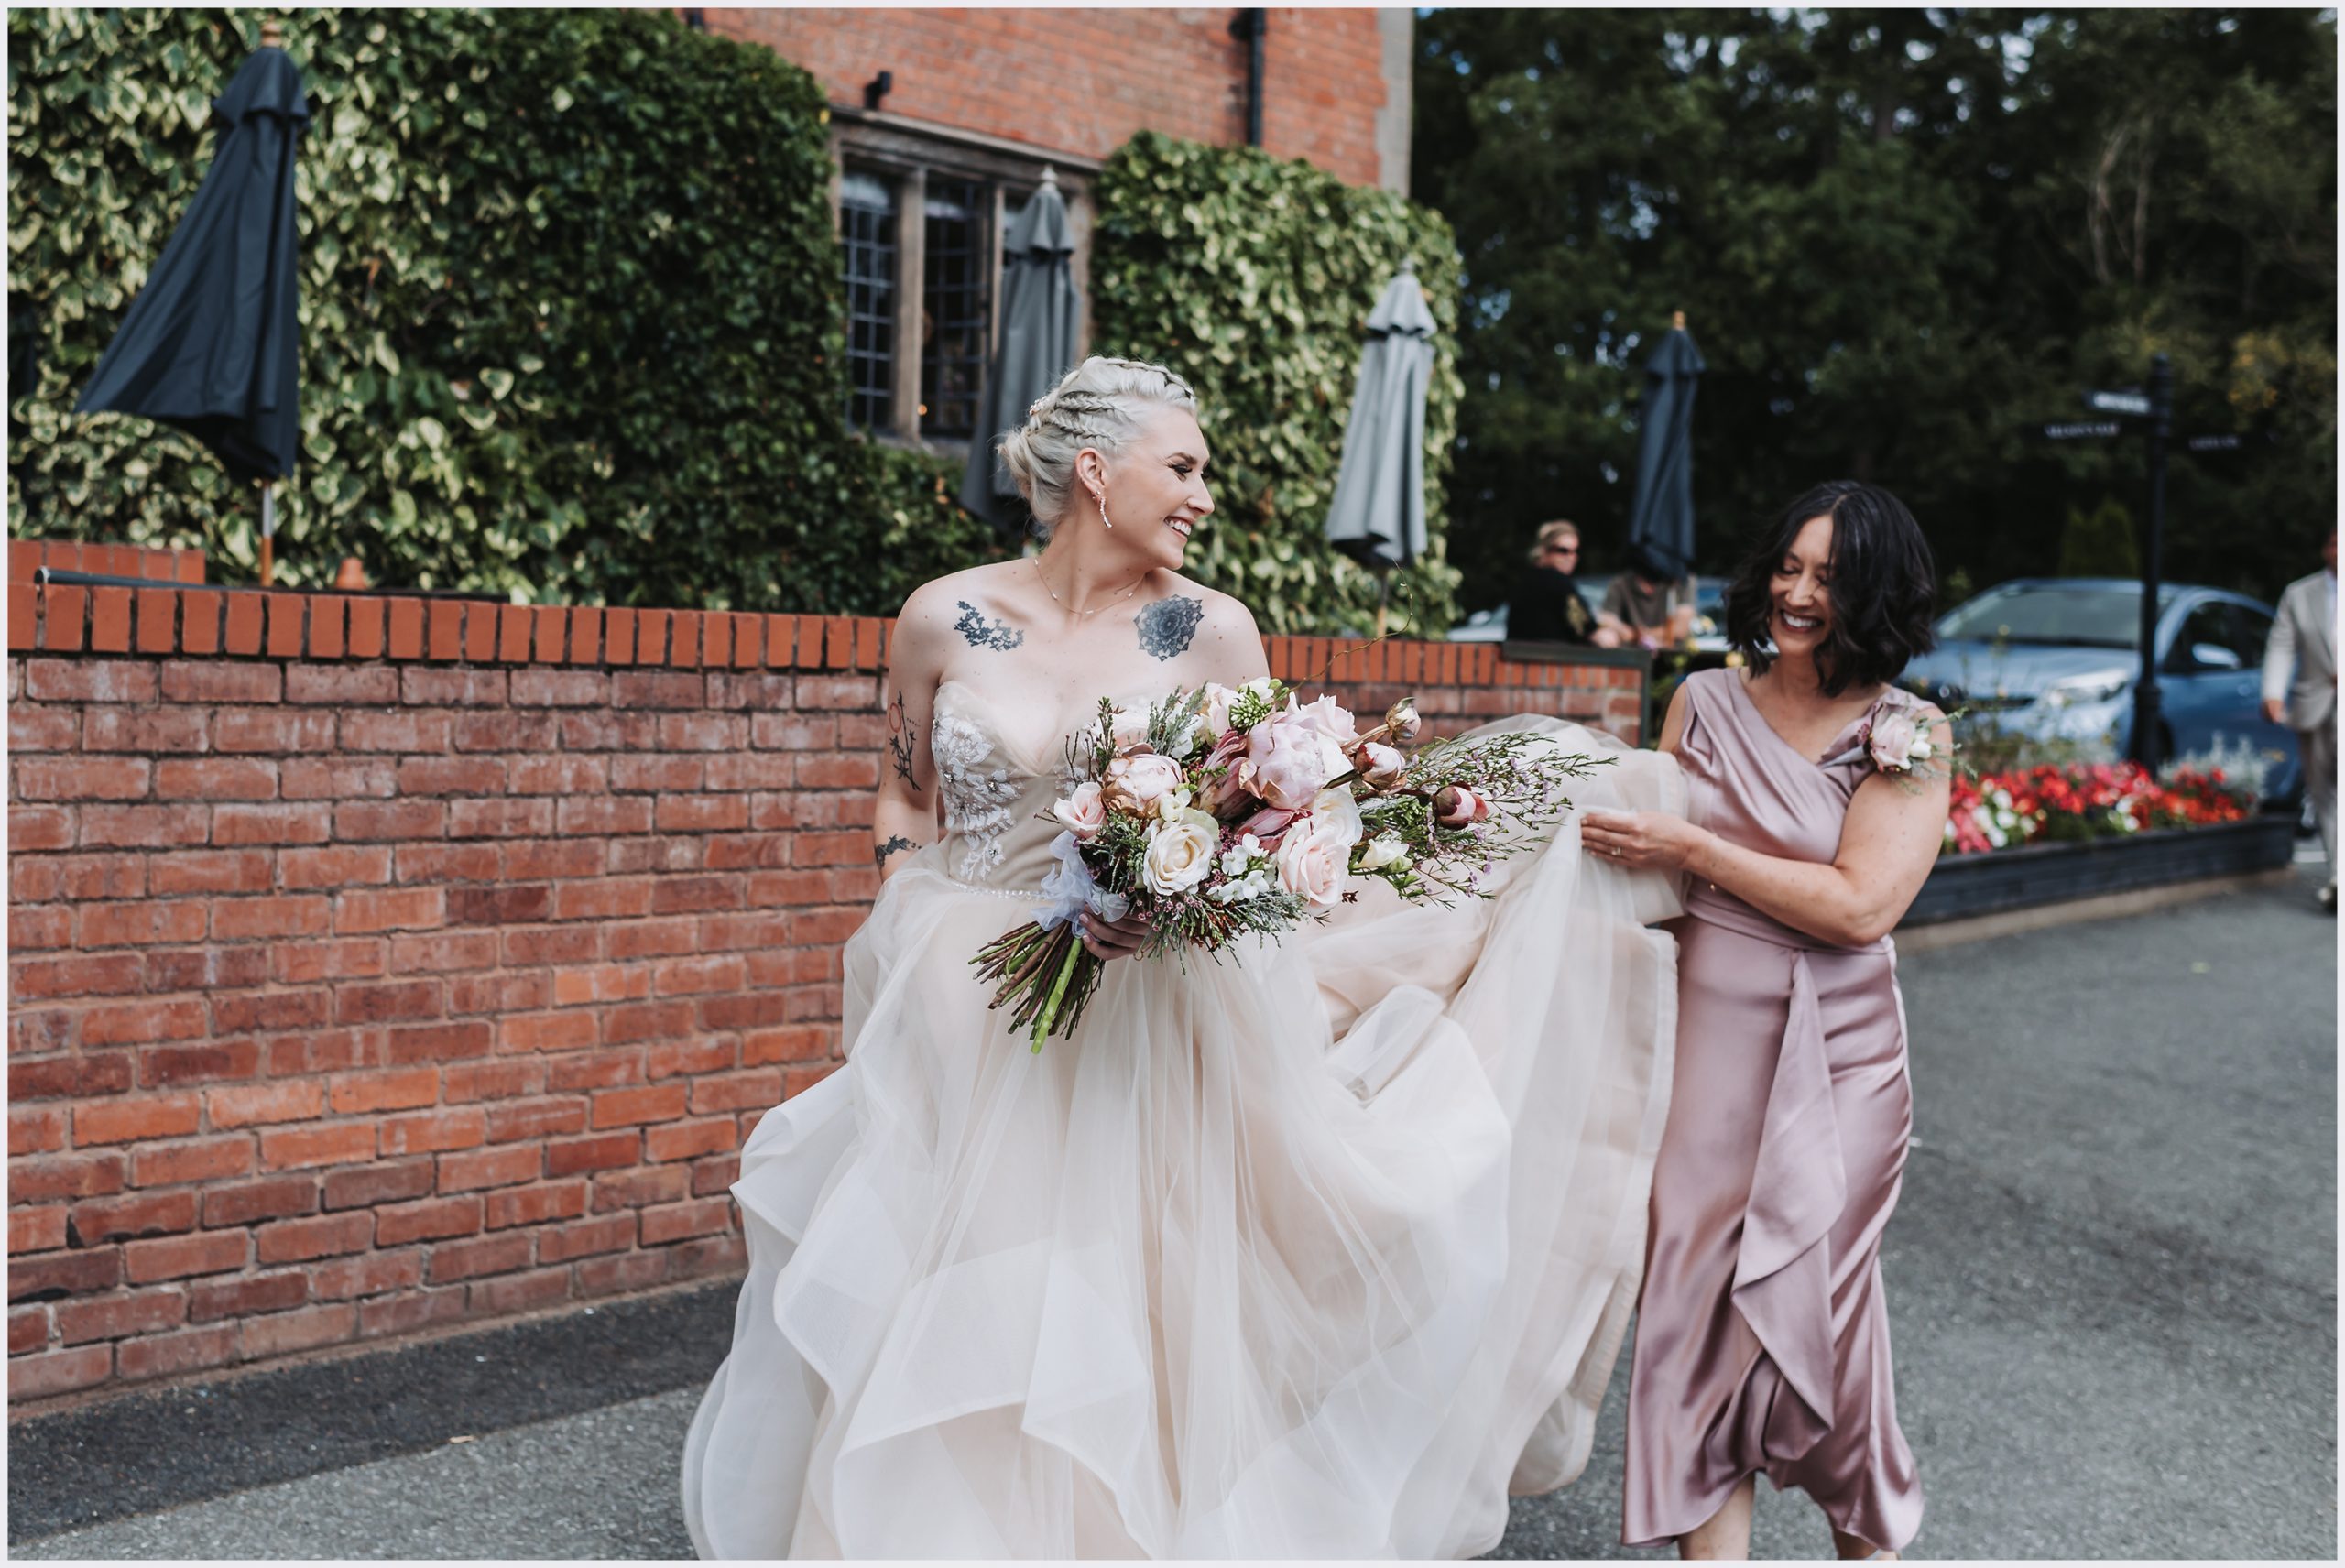 A bride and her mother walking towards the wedding ceremony.  The bride looks back at her mum smiling while her mum holds up the wedding dress.  Image captured by Helena Jayne Photography.  North Wales based wedding photographer